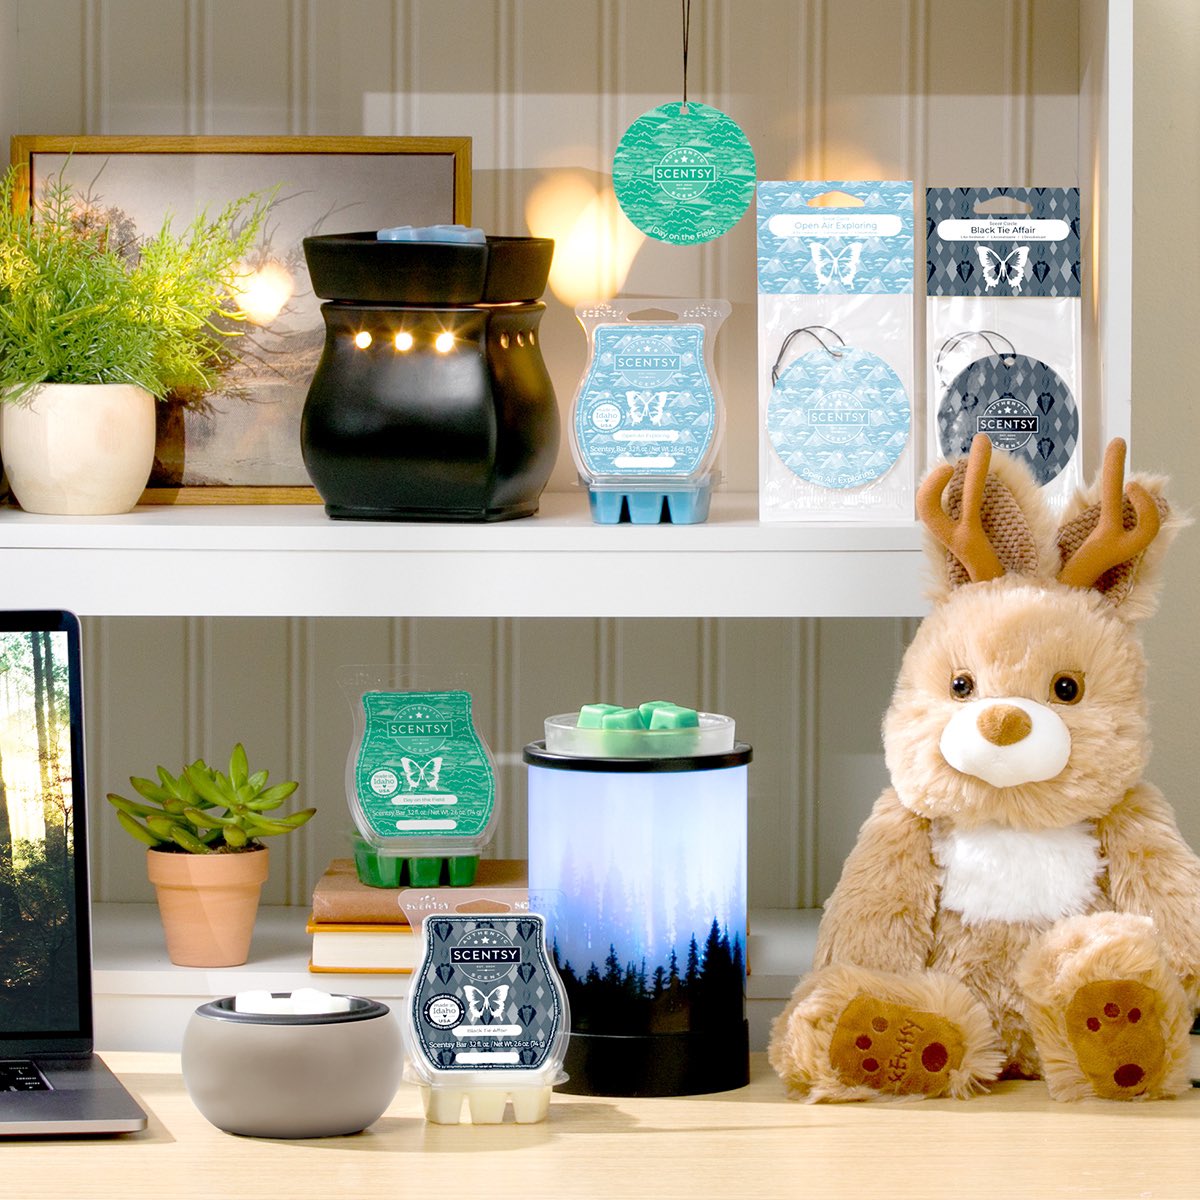 🎉 Exciting news! The Father’s Day Collection is NOW AVAILABLE on my website, while supplies last. 🎁✨ 

galaxybars.scentsy.us/shop/c/26652/s…

#galaxybars #fatherfigures #petdads #jackelope #fathersdaygifts #fathersdaycollection #giftideas